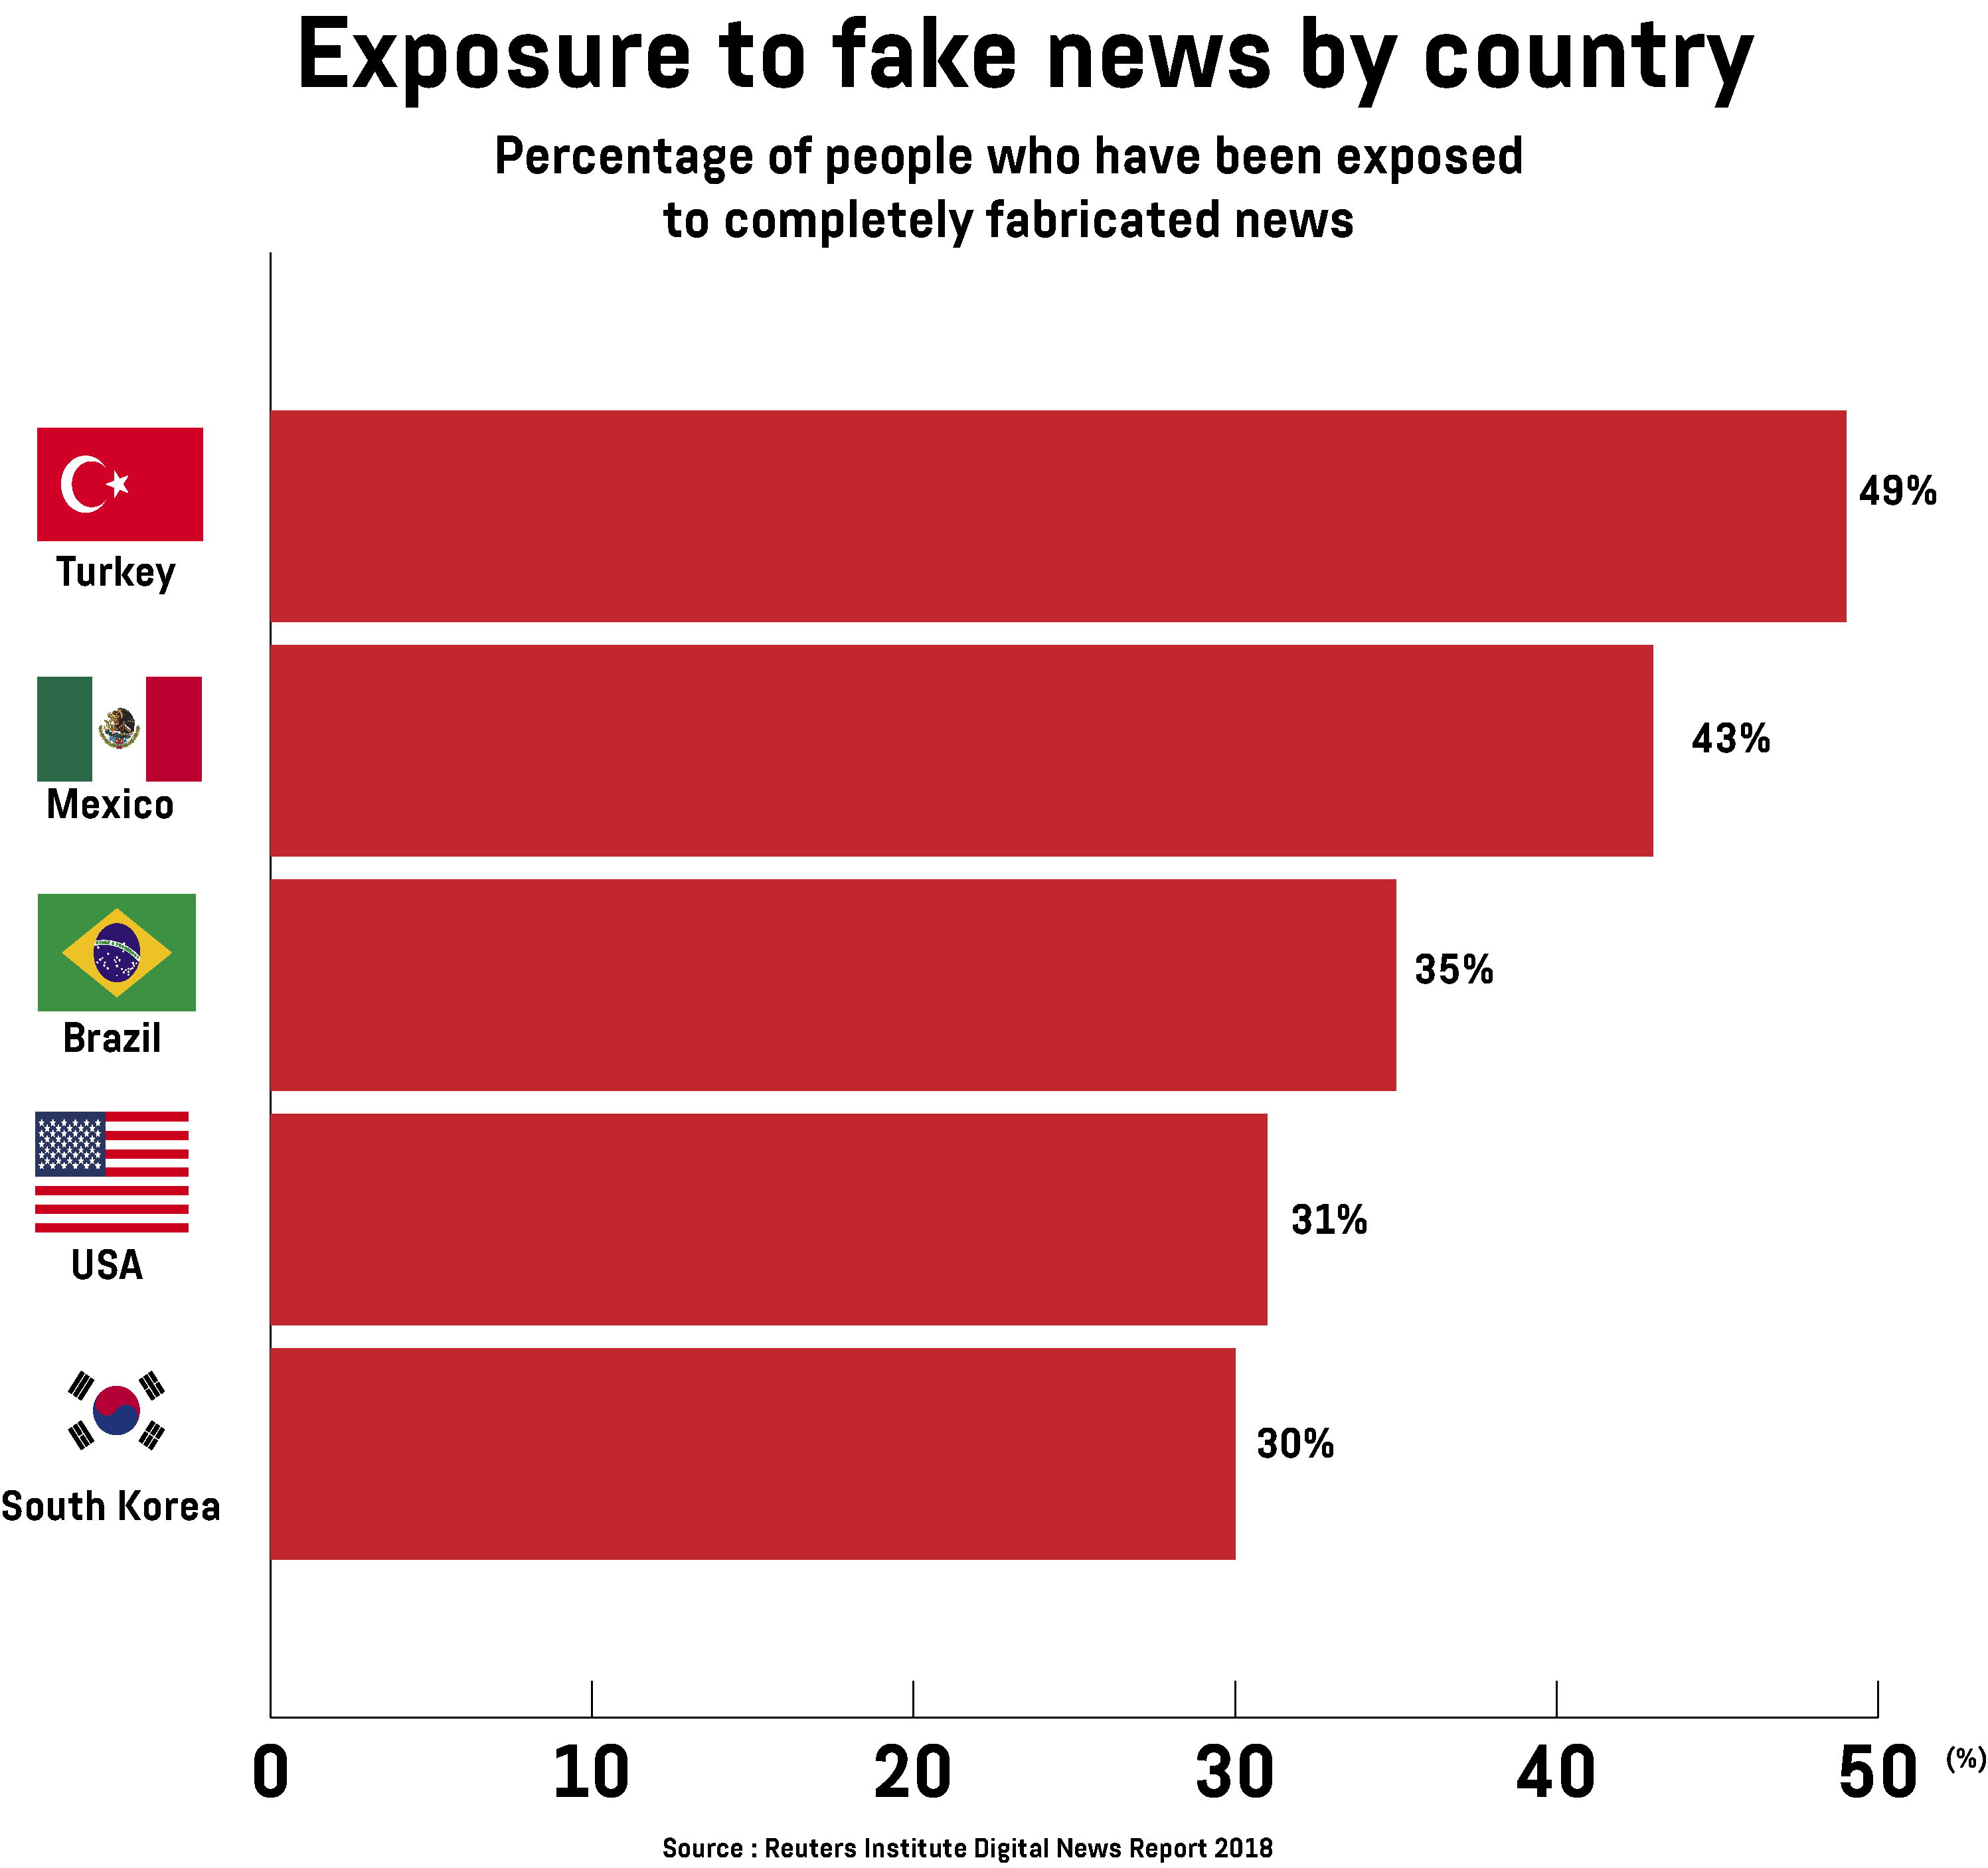 A horizontal bar graph showing the percentage of people who have been exposed to fake news in Turkey, Mexico, Brazil, the USA, and South Korea.